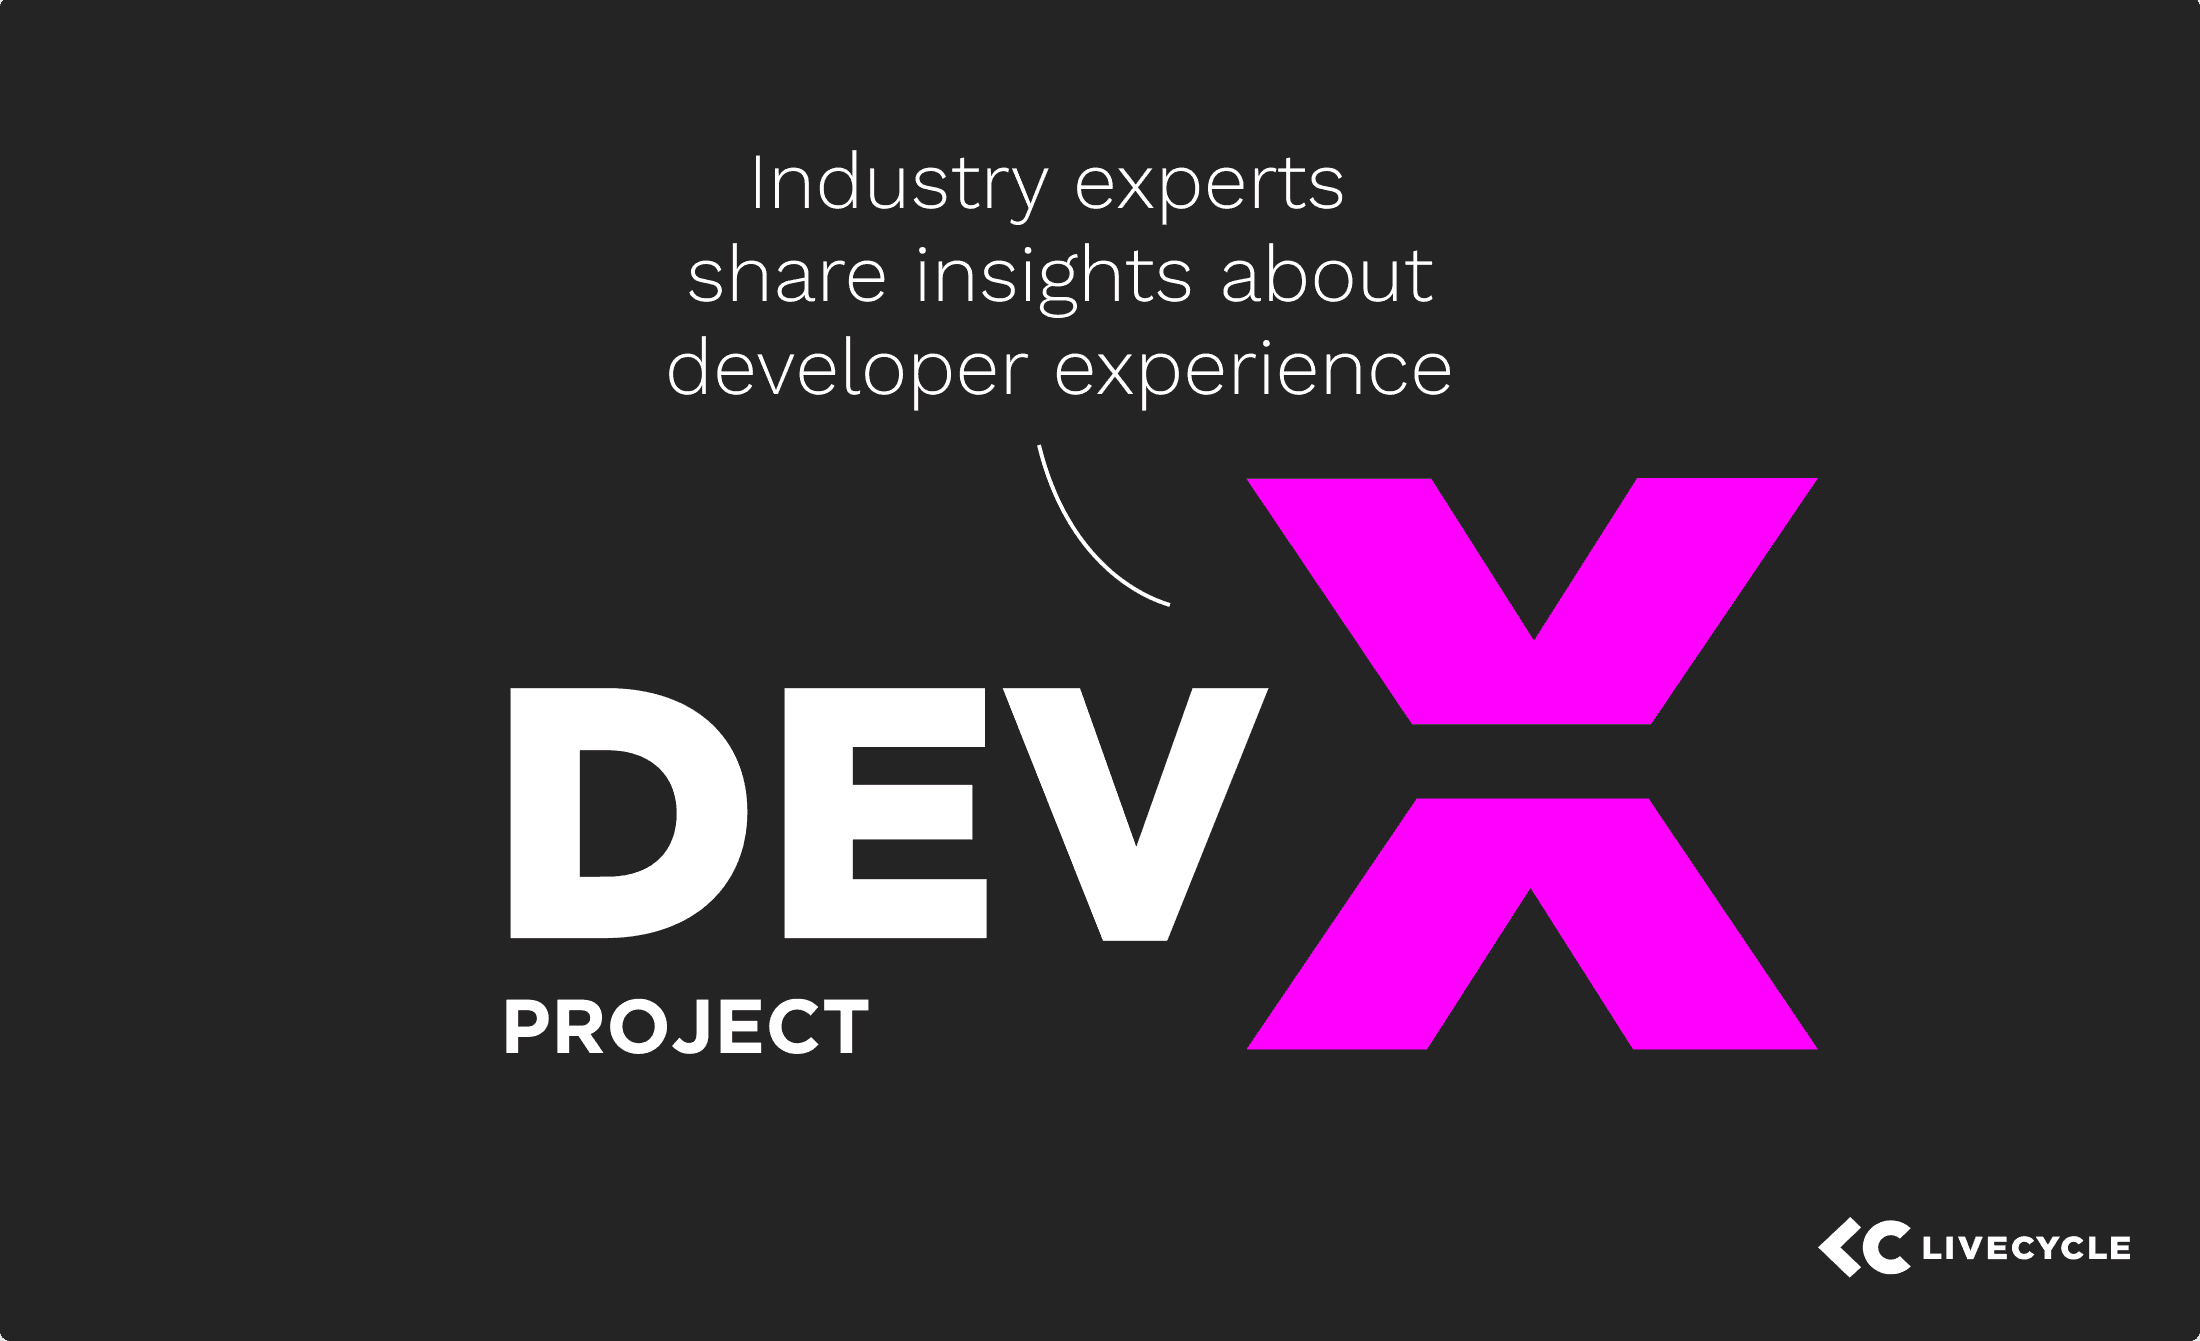 Introducing "The Dev-X Project"